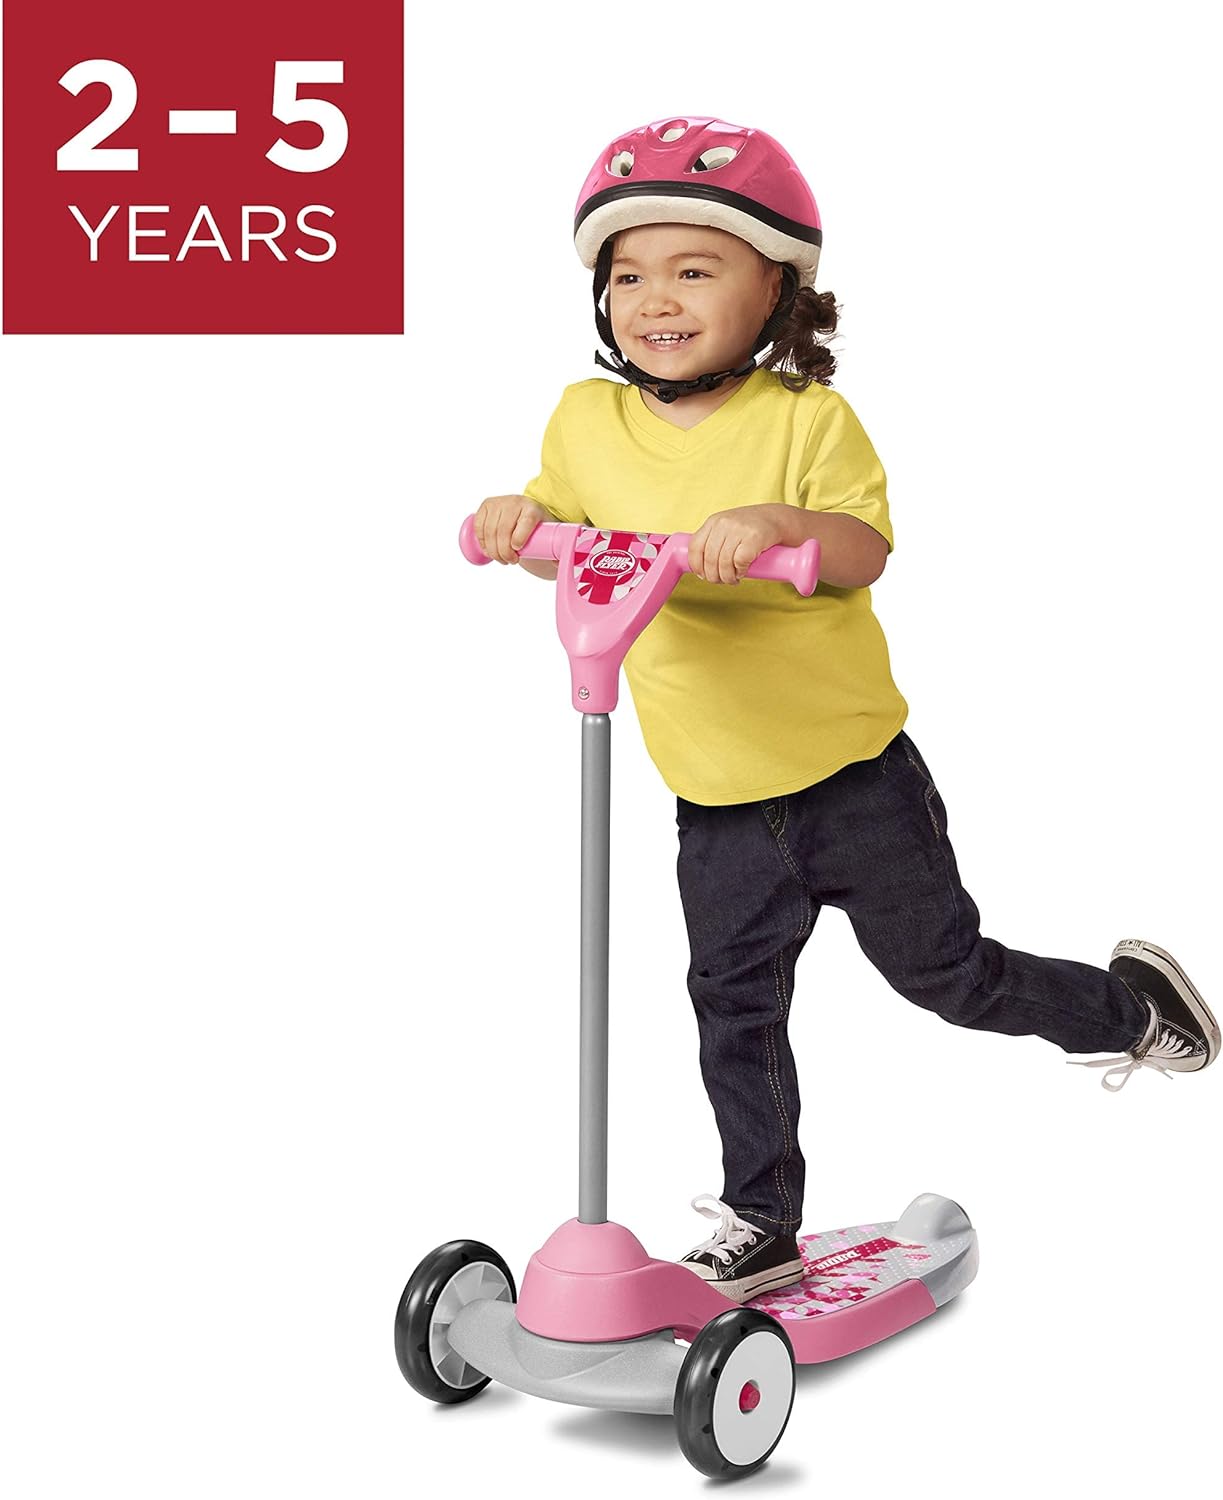 Radio Flyer Scooter Review